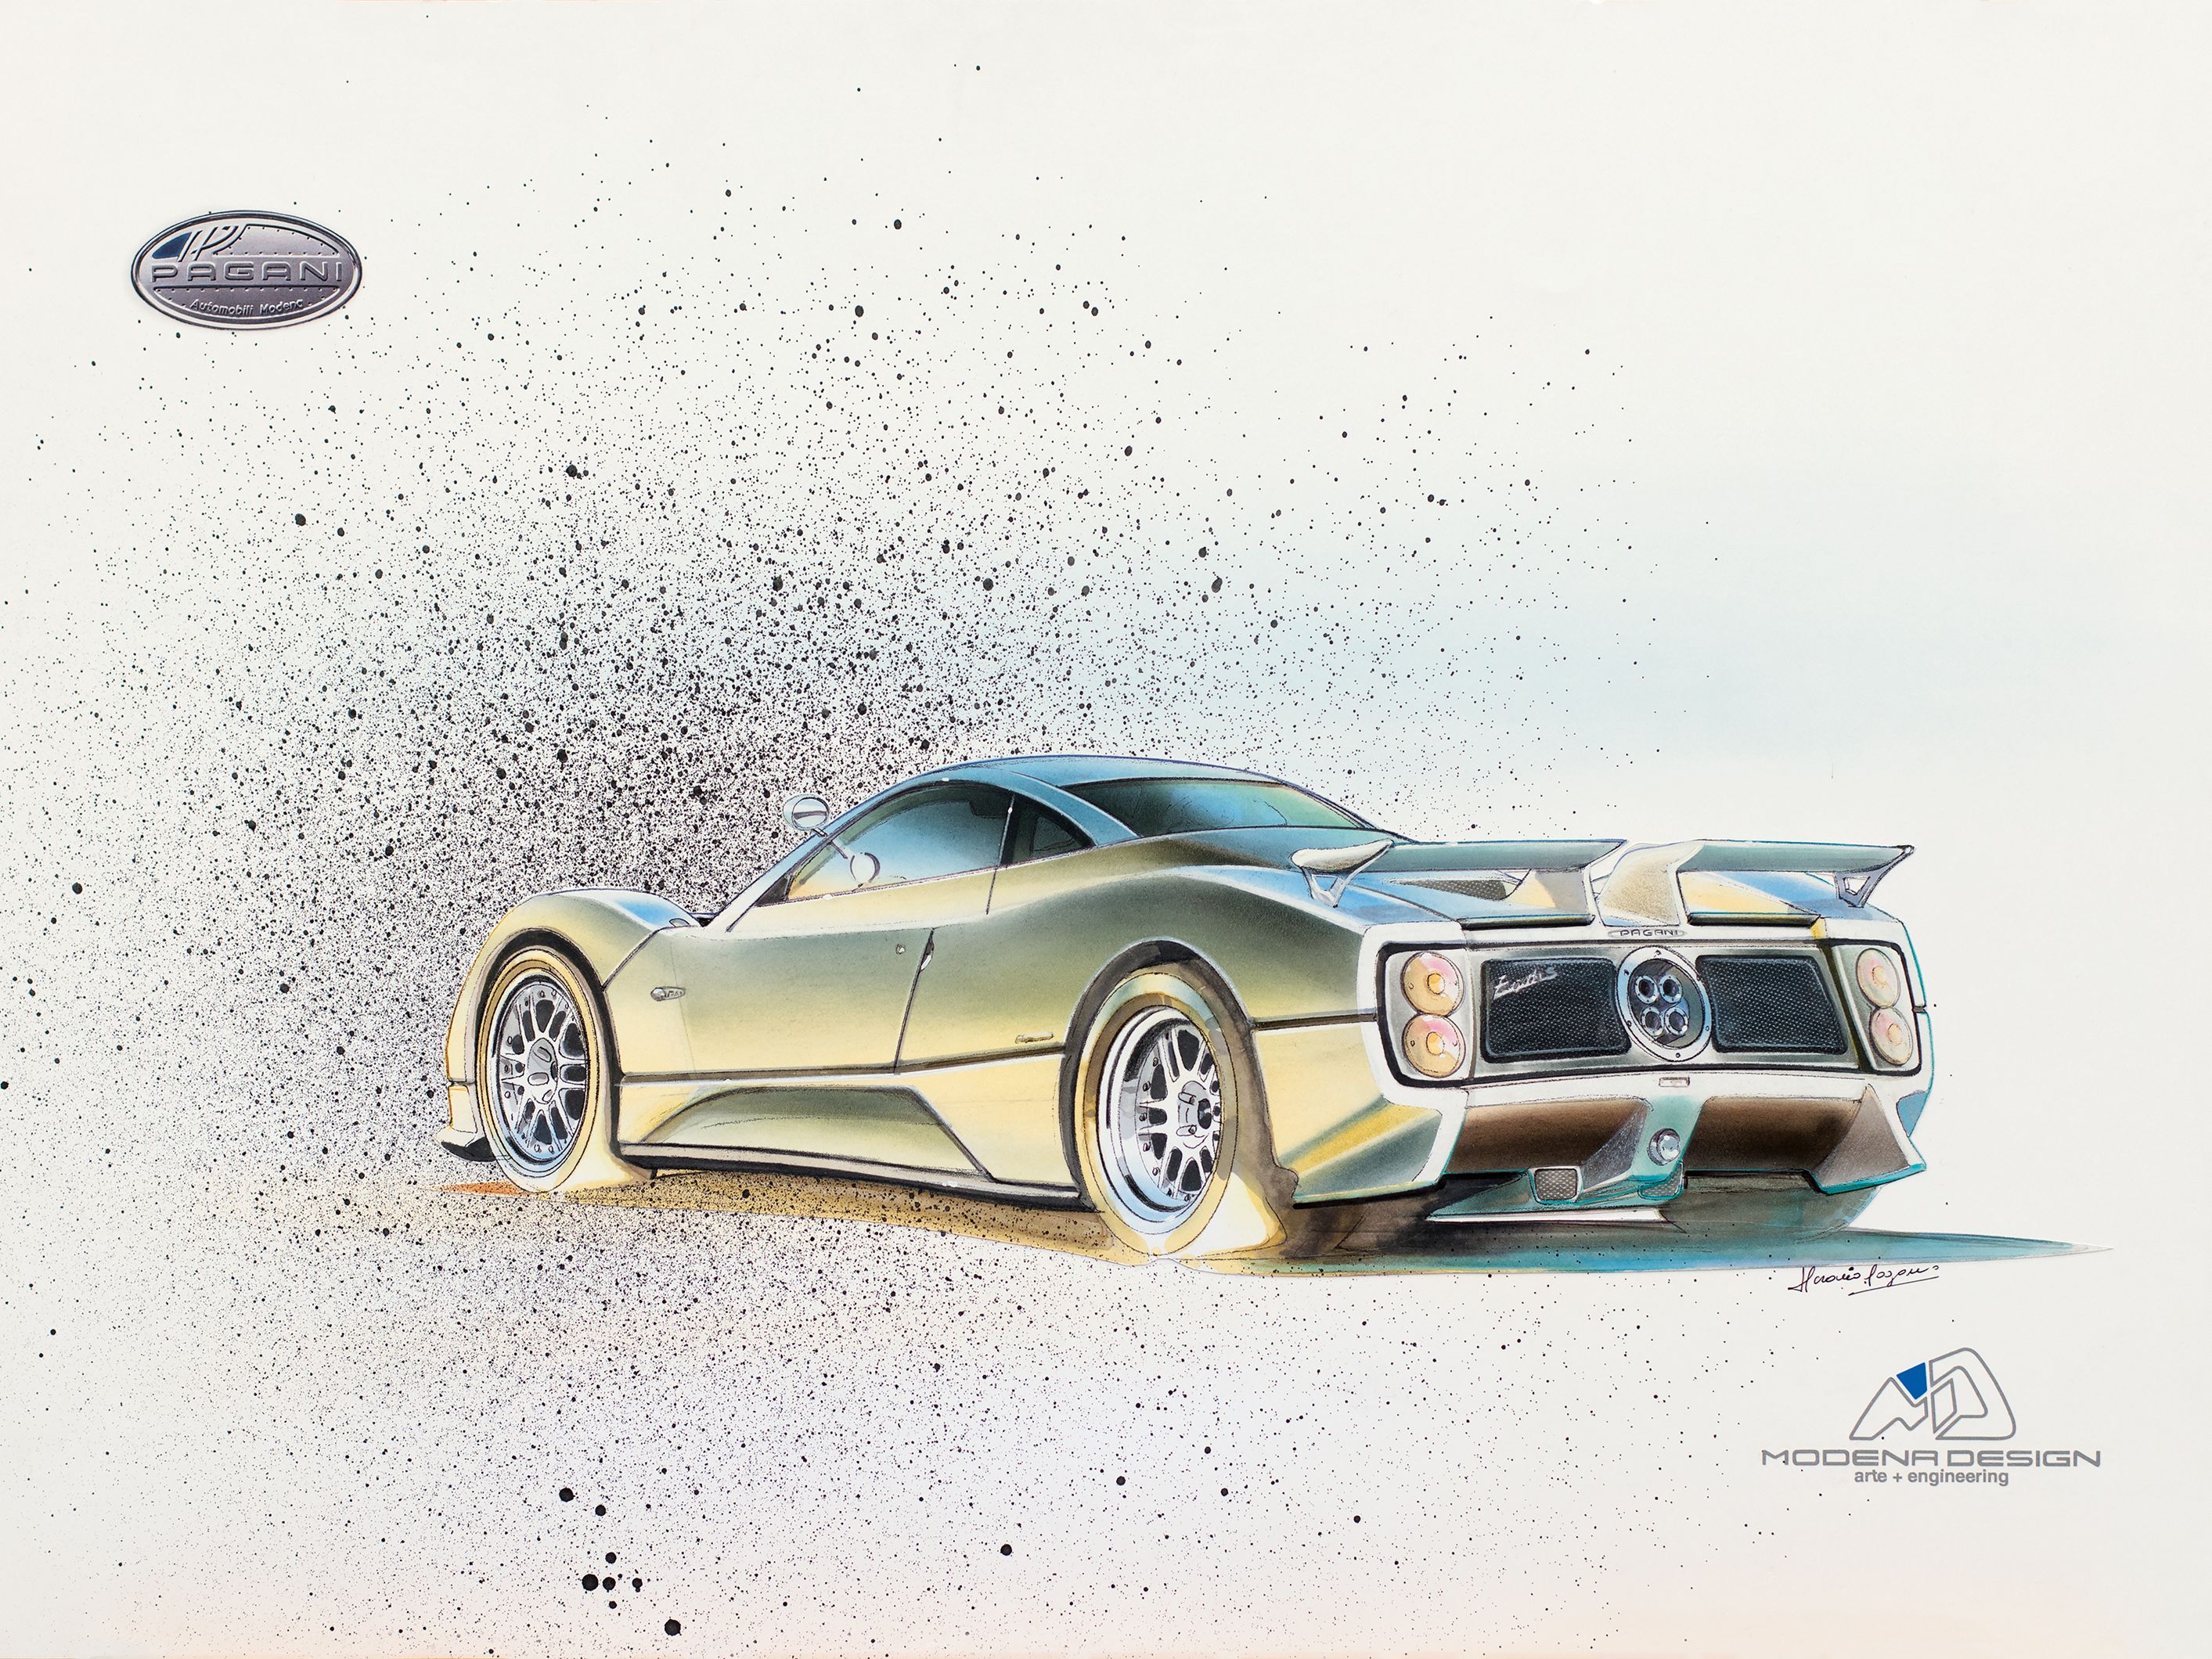 What Would You Say If The C9 Corvette Looked Like This GM Design Sketch? |  Carscoops